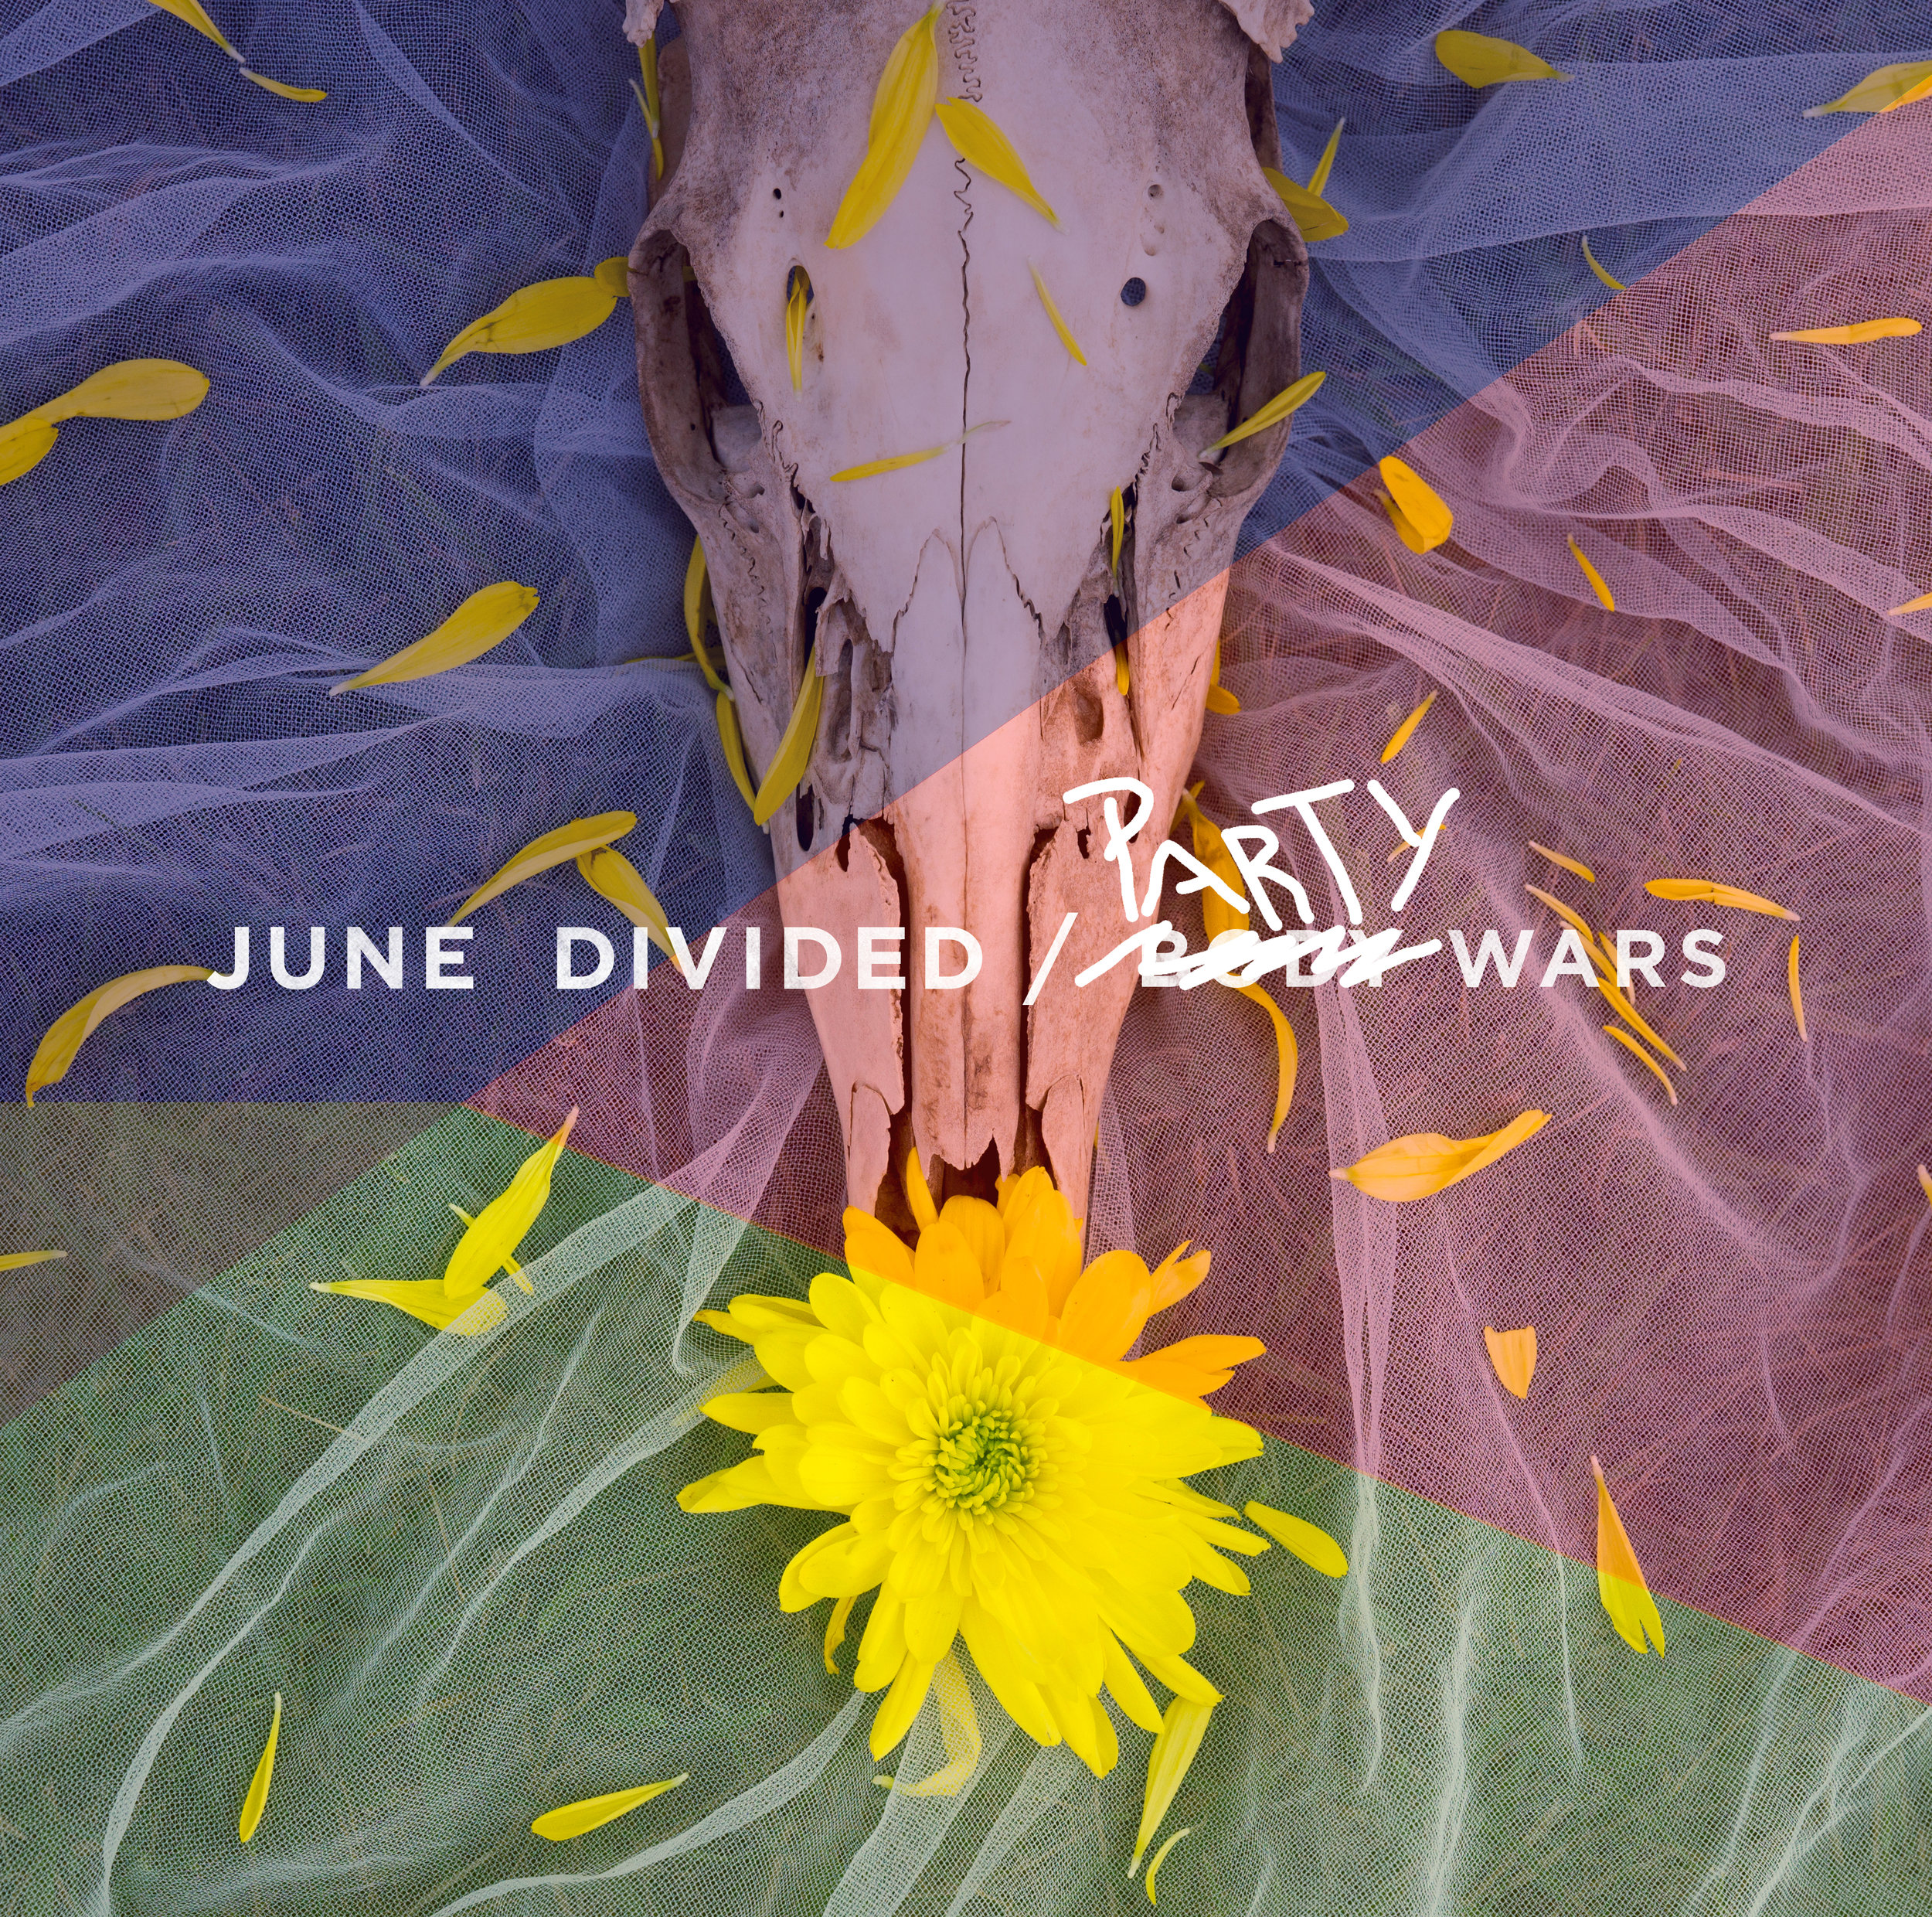 June Divided - "Body Wars" (Acoustic)